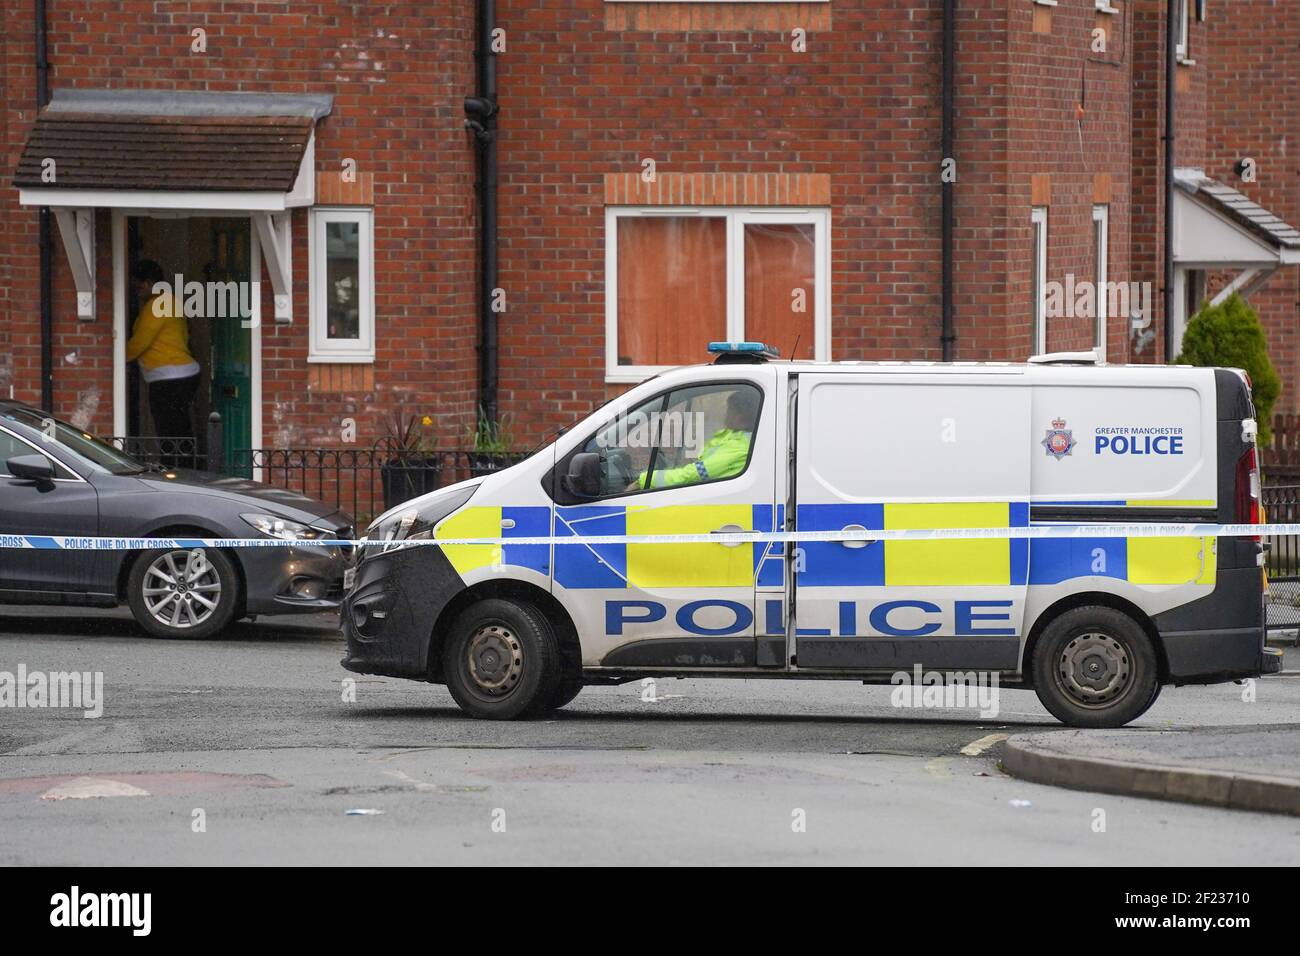 Manchester, UK, 10/03/2021 Police guard a crime scene after a woman was shot last night in north Manchester. Officers were called at 6:00pm to Everside Drive, north Manchester, that a woman in her early 30s had arrived at the hospital with a gunshot wound to her leg. Photo Credit: Ioannis Alexopoulos/Alamy Live News Stock Photo